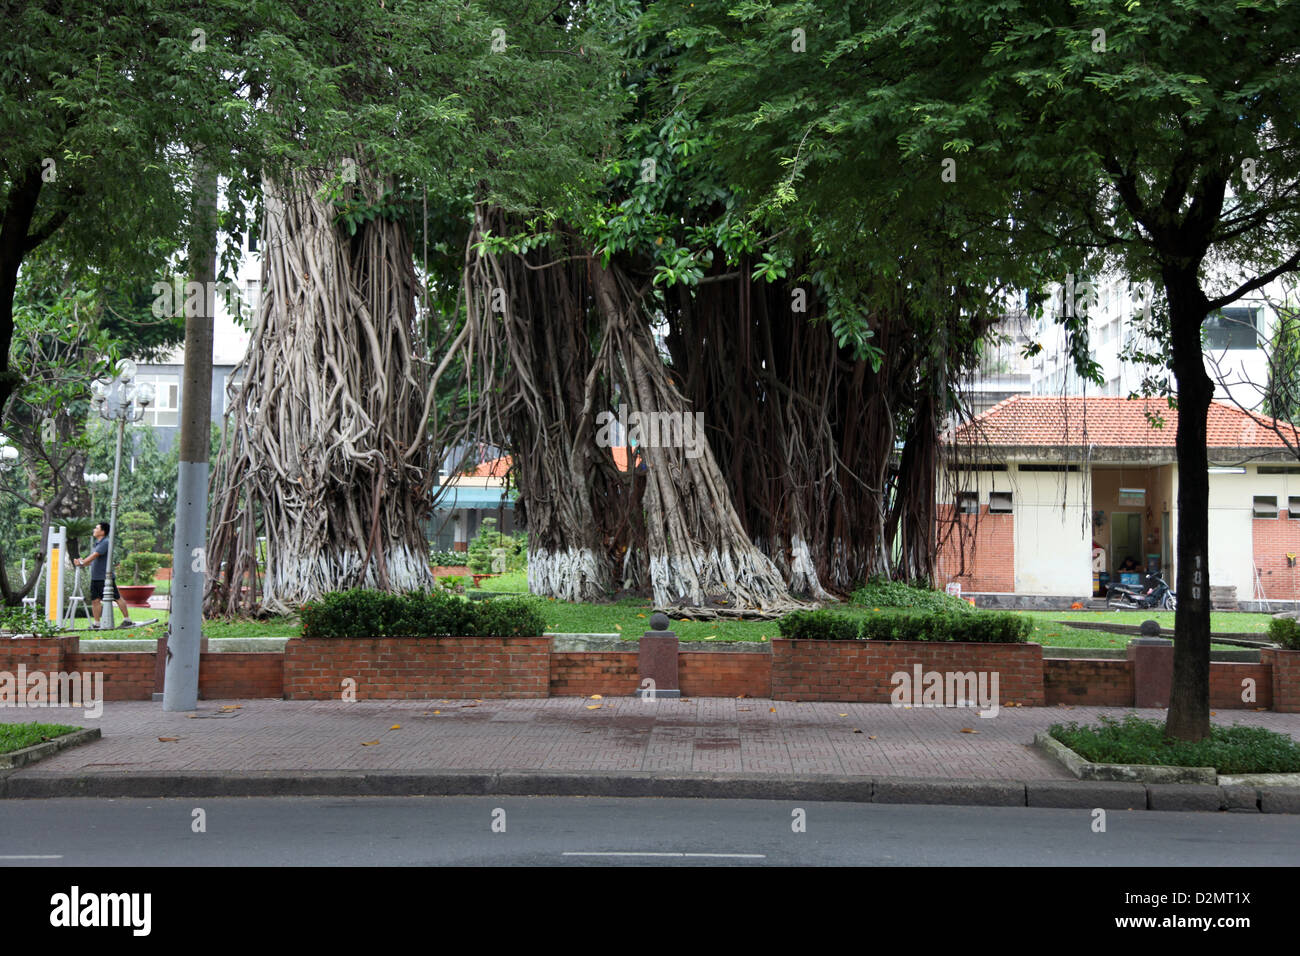 It's a photo of a Banian or Banyan Tree Root in a city of Saigon in Vietnam. It's in th streets we can see its roots Stock Photo